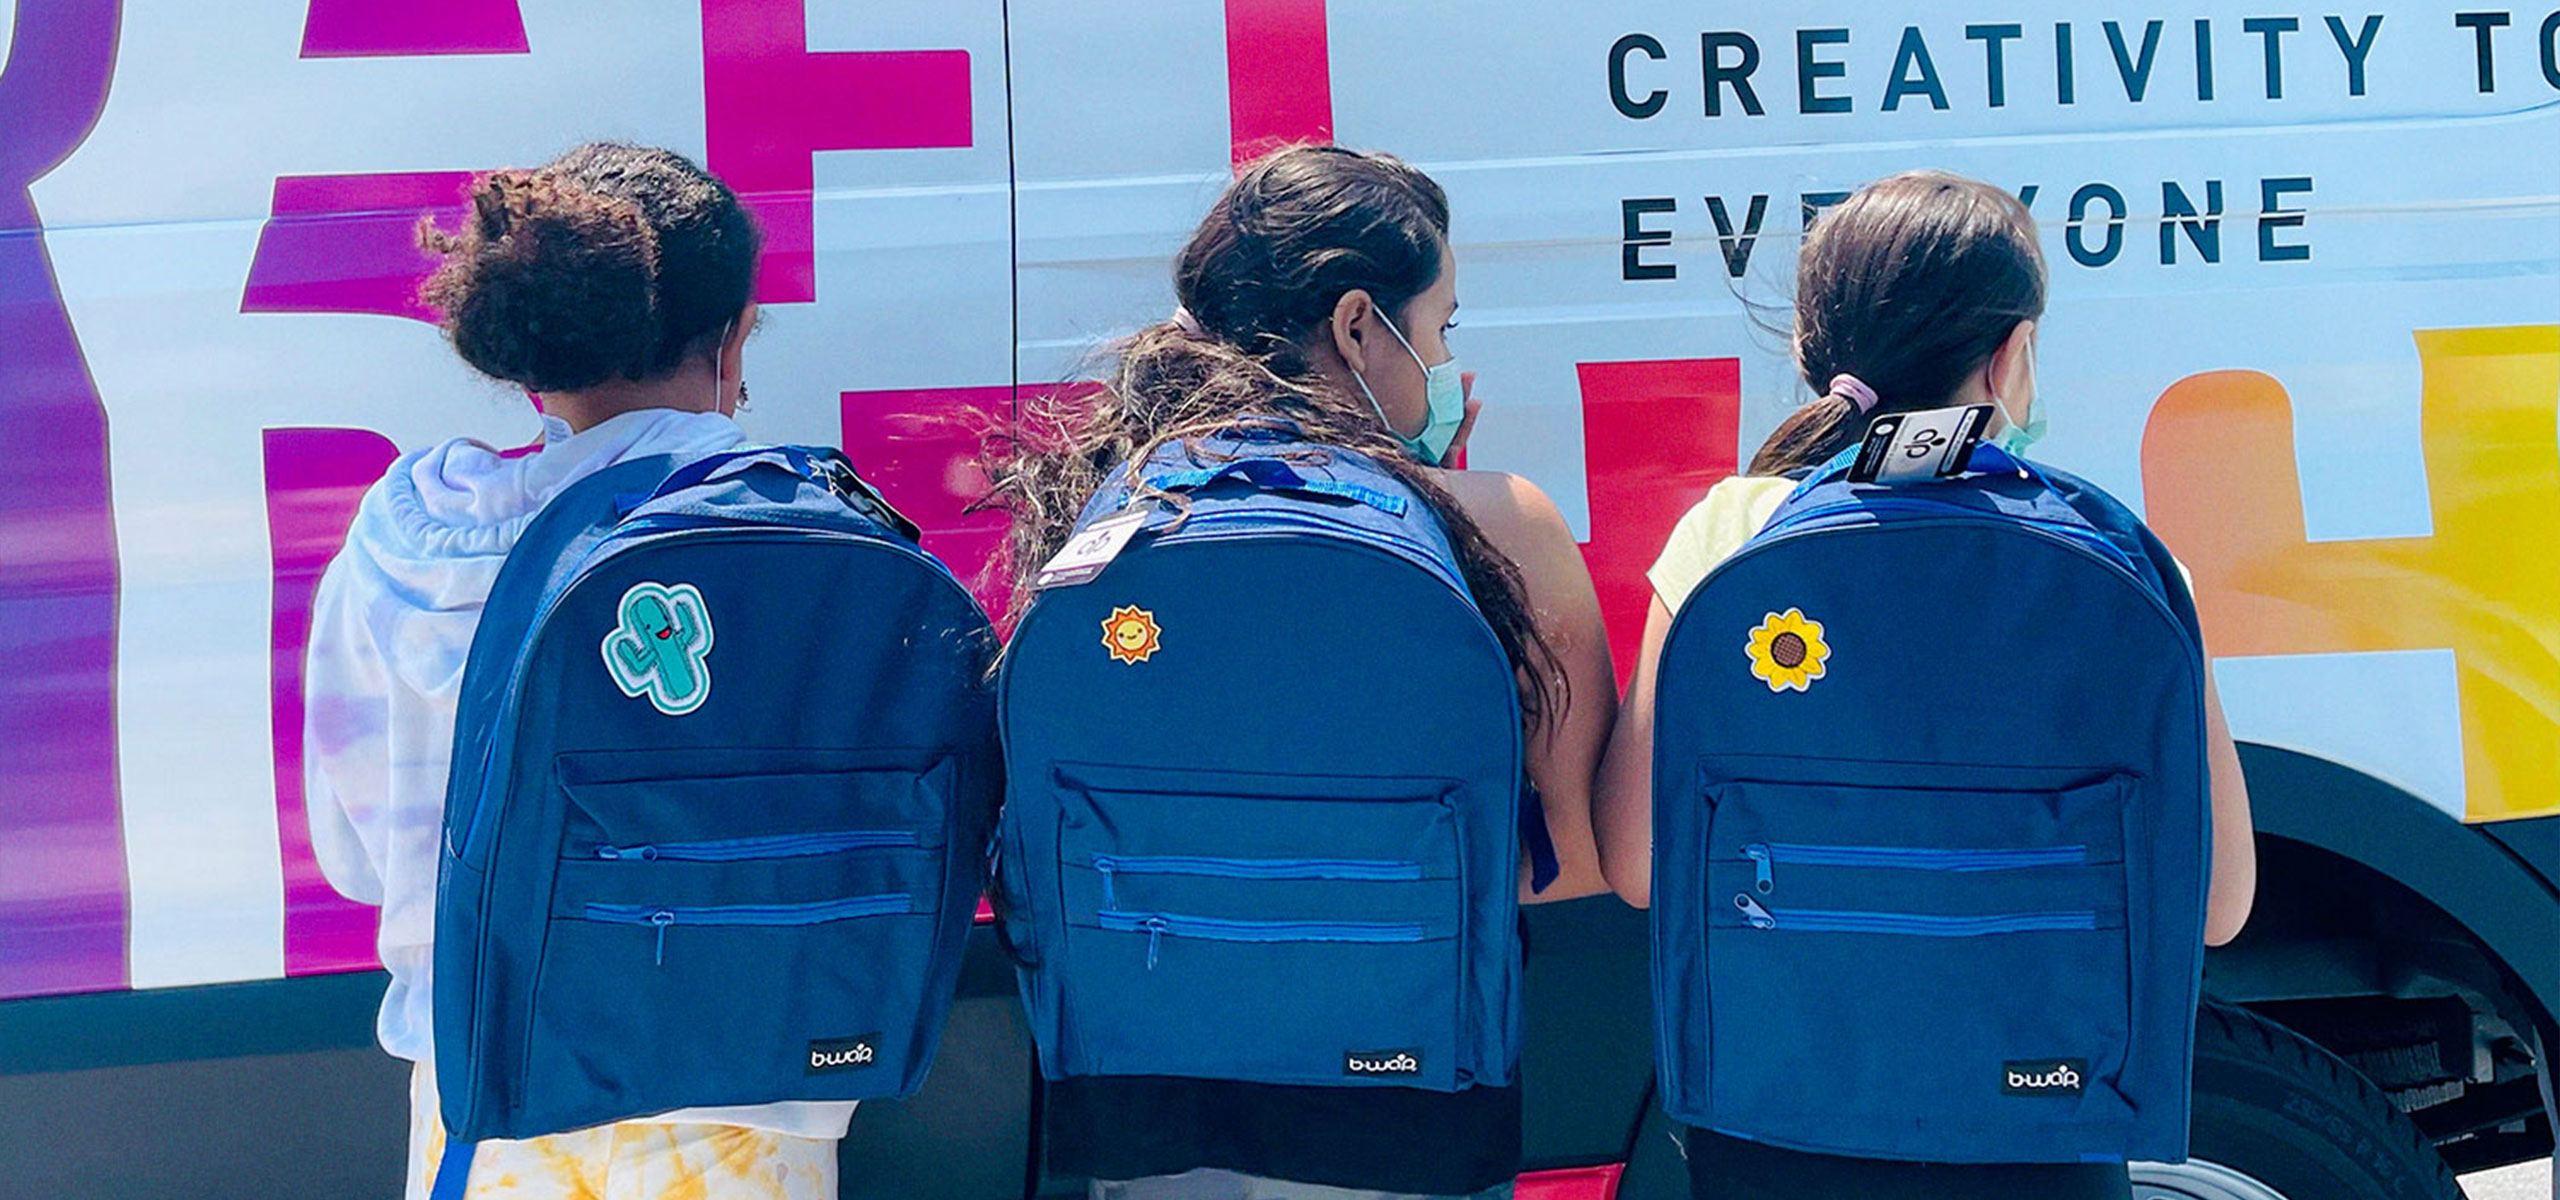 Three children showing off their backpacks in front of the Mobile MakeArt van